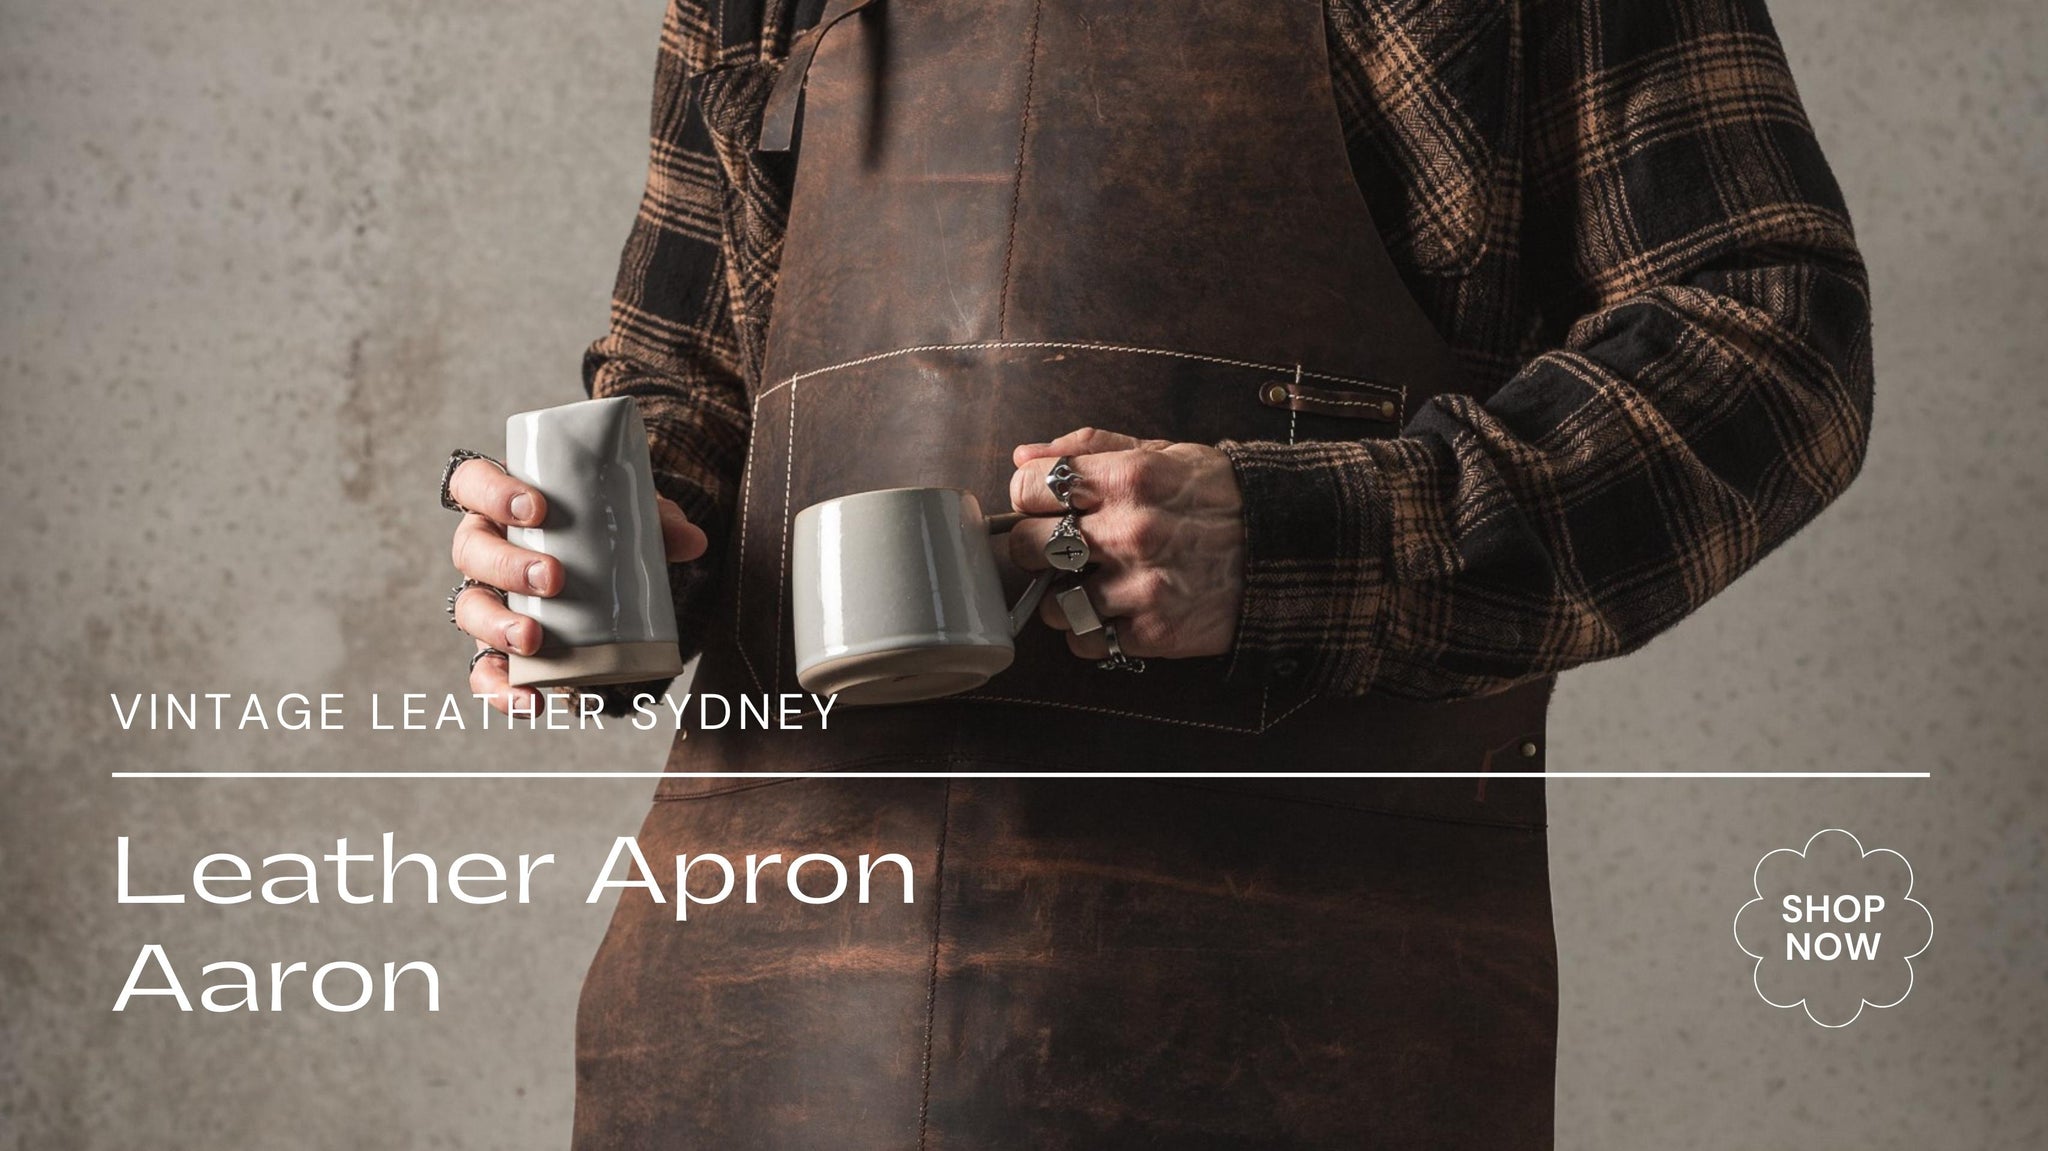 LEATHER APRON AARON BY VINTAGE LEATHER SYDNEY